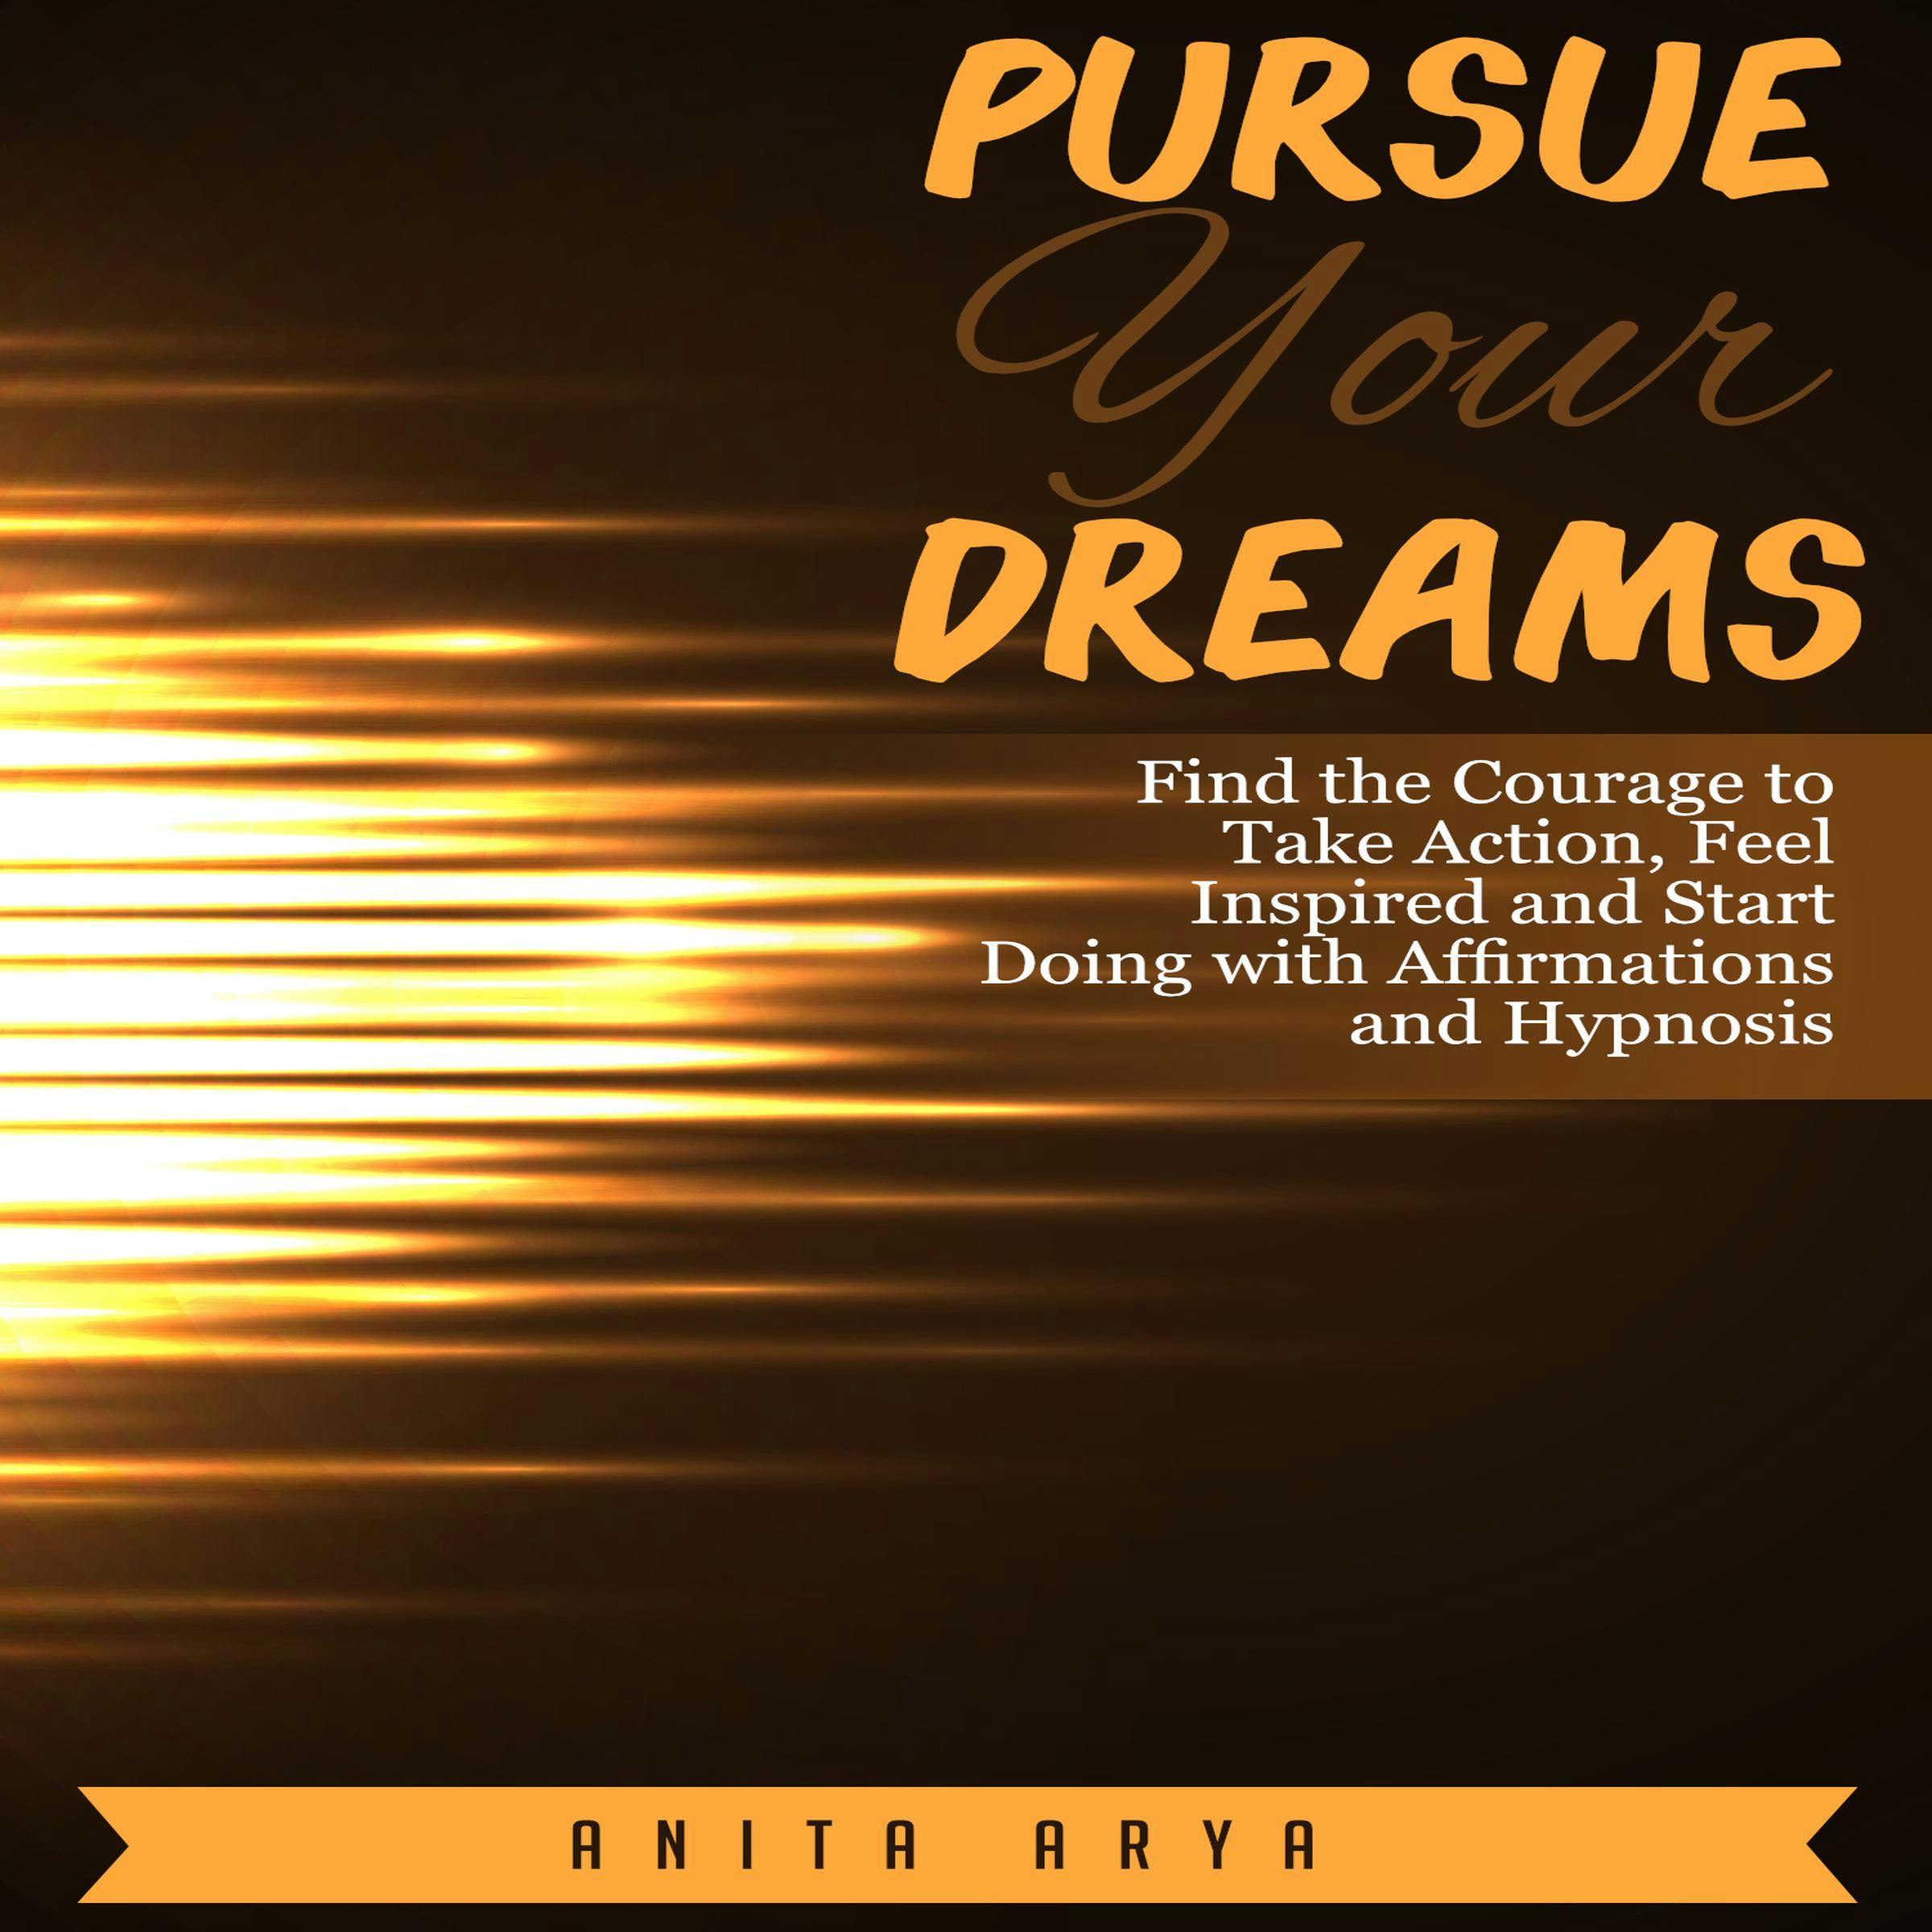 Pursue Your Dreams: Find the Courage to Take Action, Feel Inspired and Start Doing with Affirmations and Hypnosis - Anita Arya